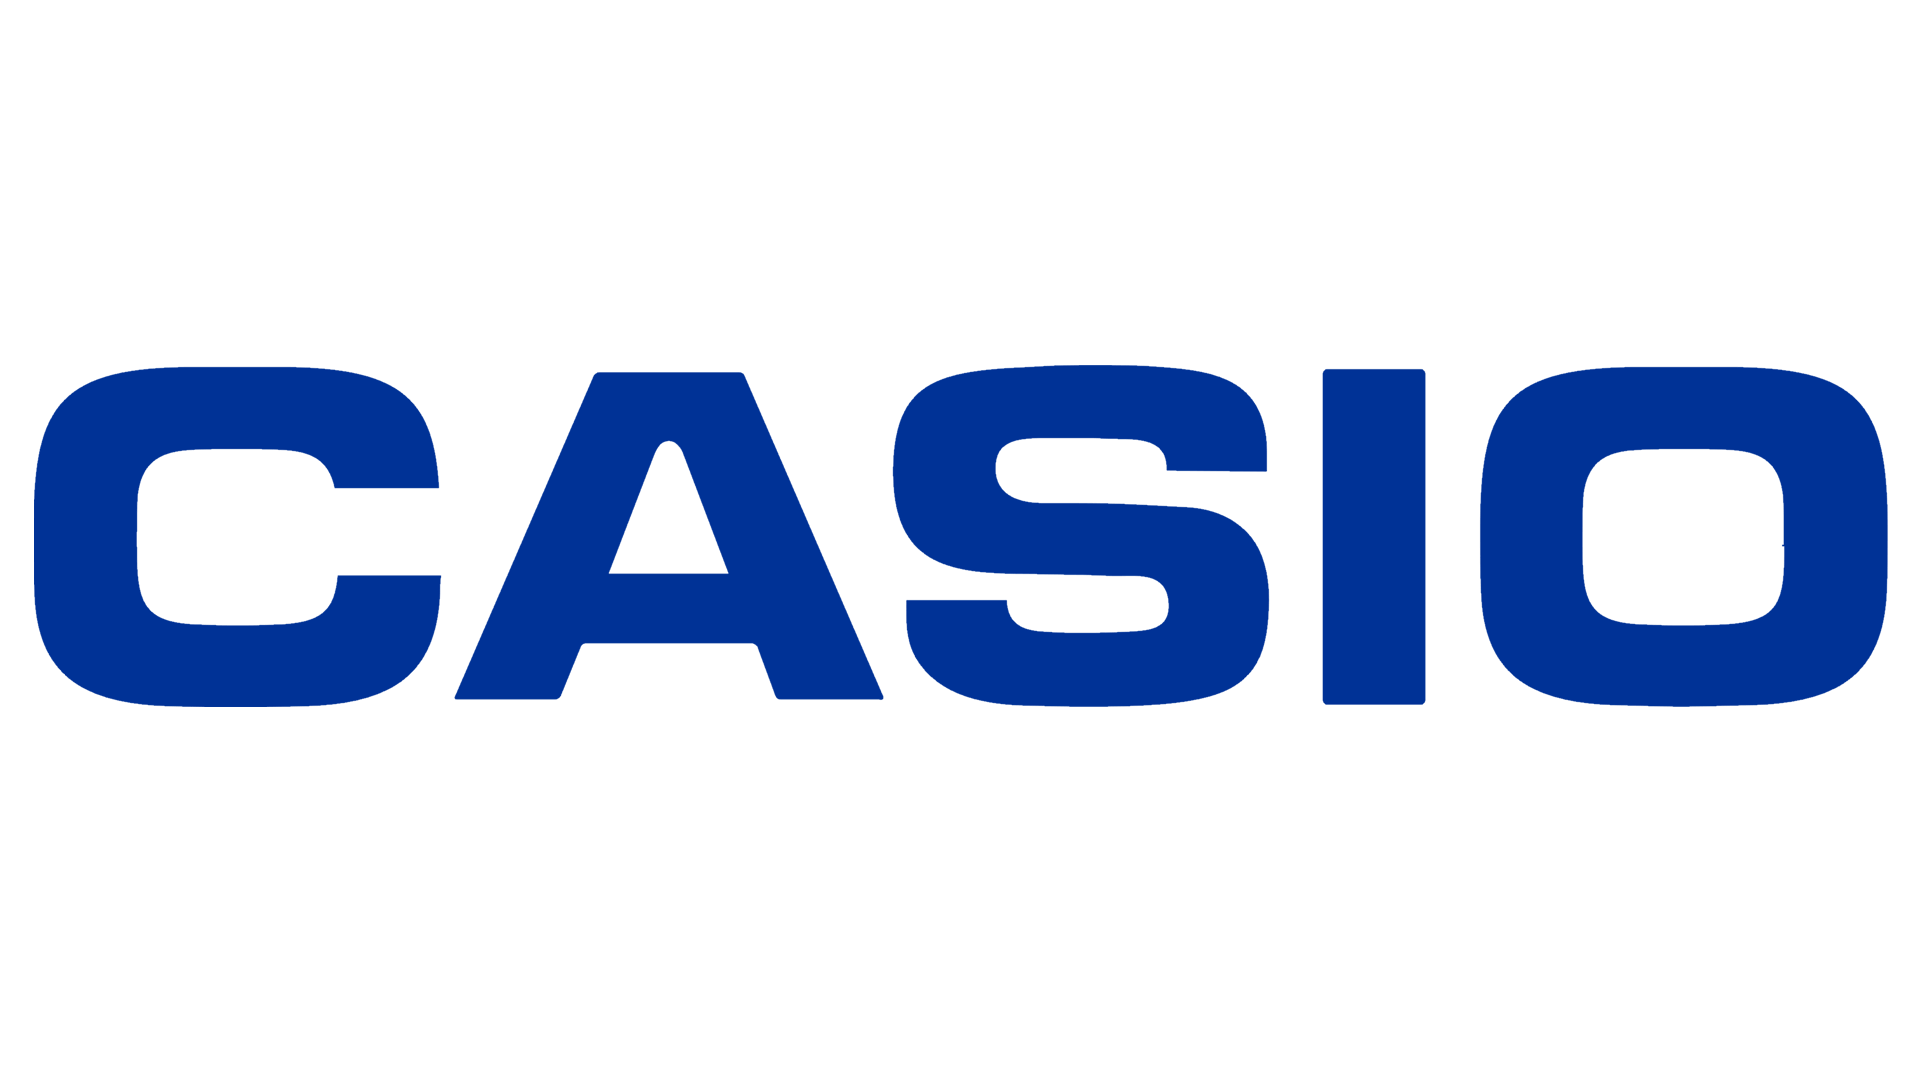 Casio wallpapers